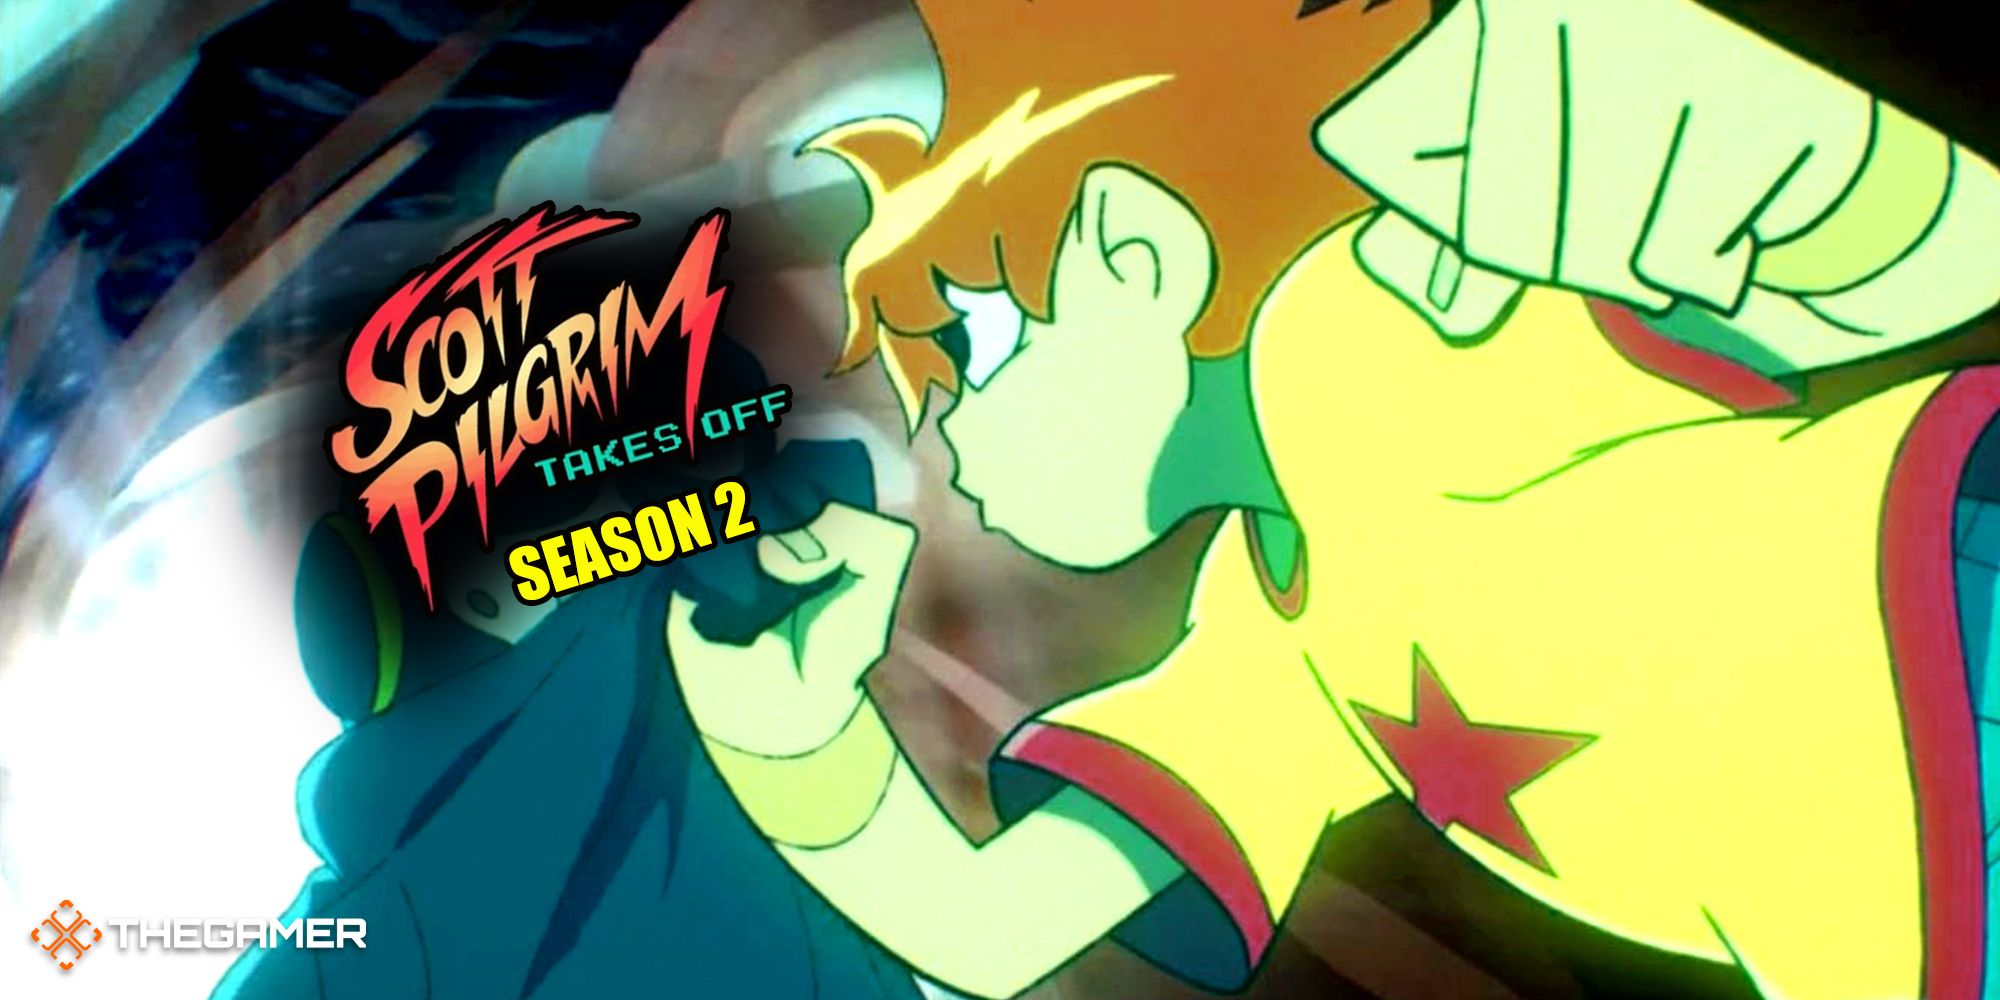 An animated Scott Pilgrim punching a character whose head is replaced with a logo saying Scott Pilgrim Takes Off Season 2